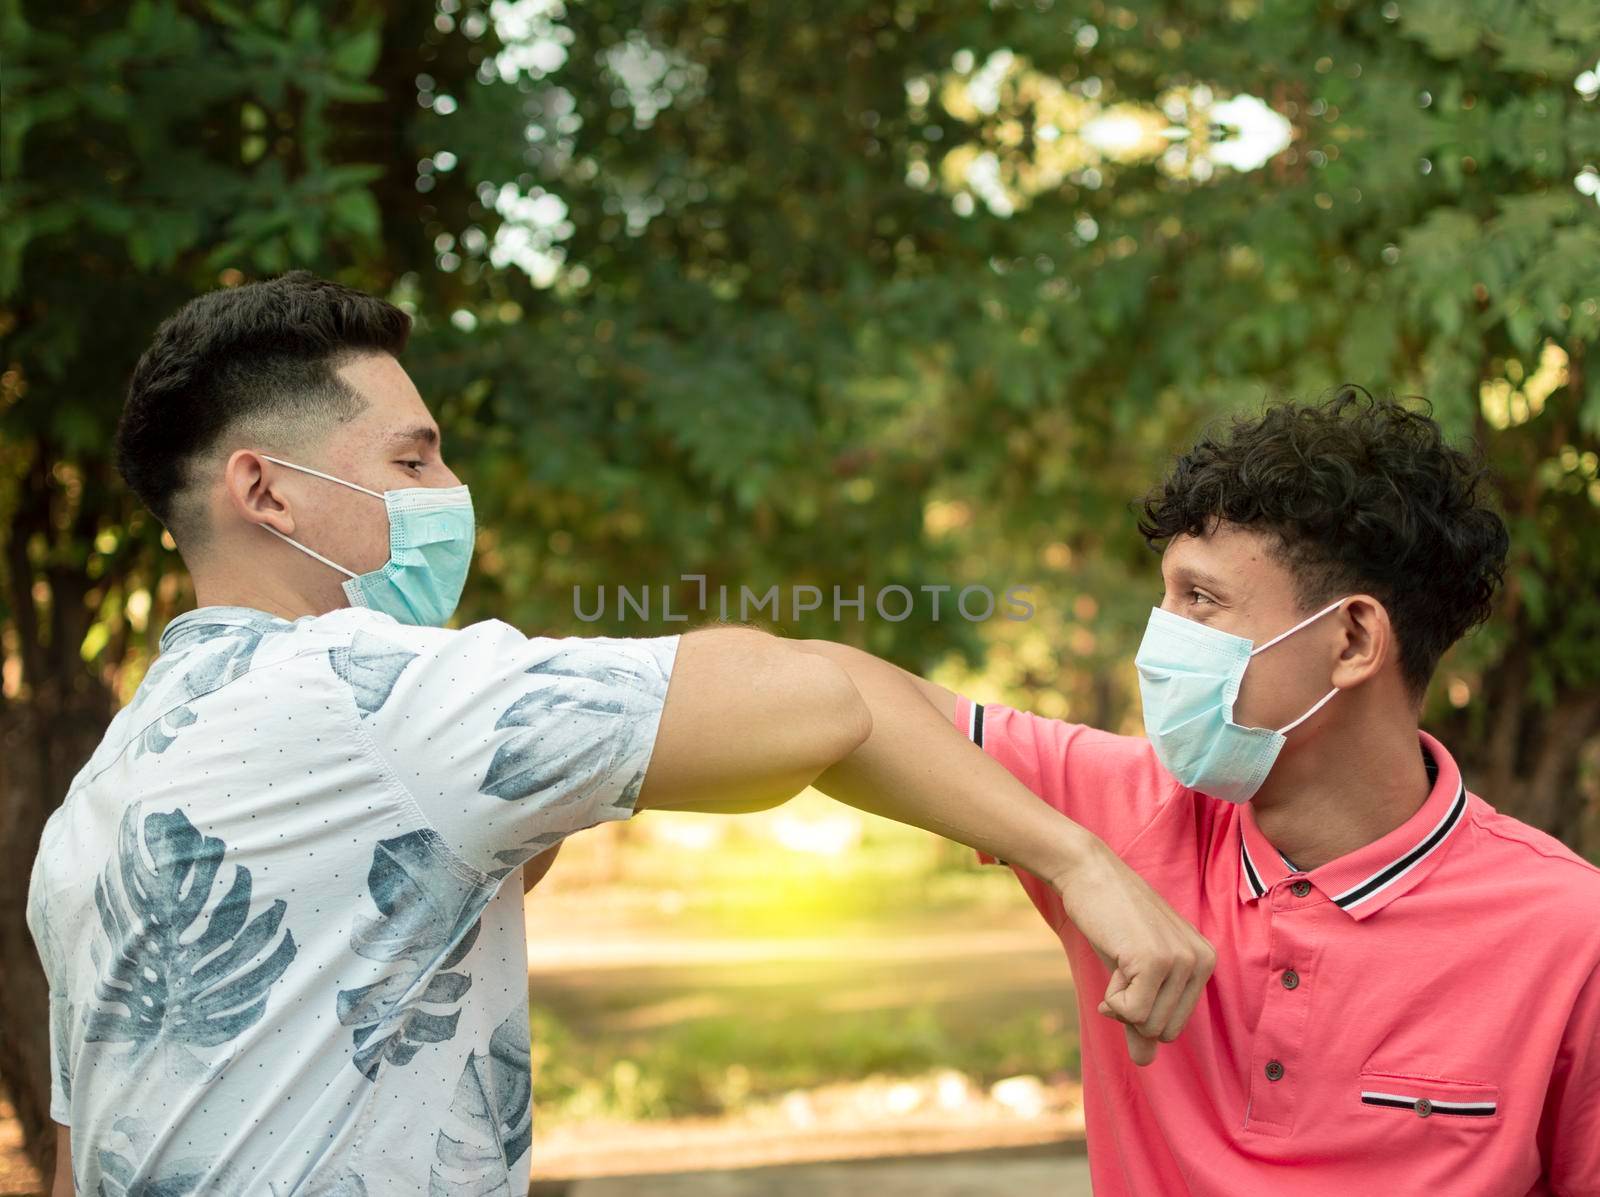 Two young people bumping their elbows, image of two young people bumping their elbows in a friendly way, about two elbows bumping in a friendly way by isaiphoto